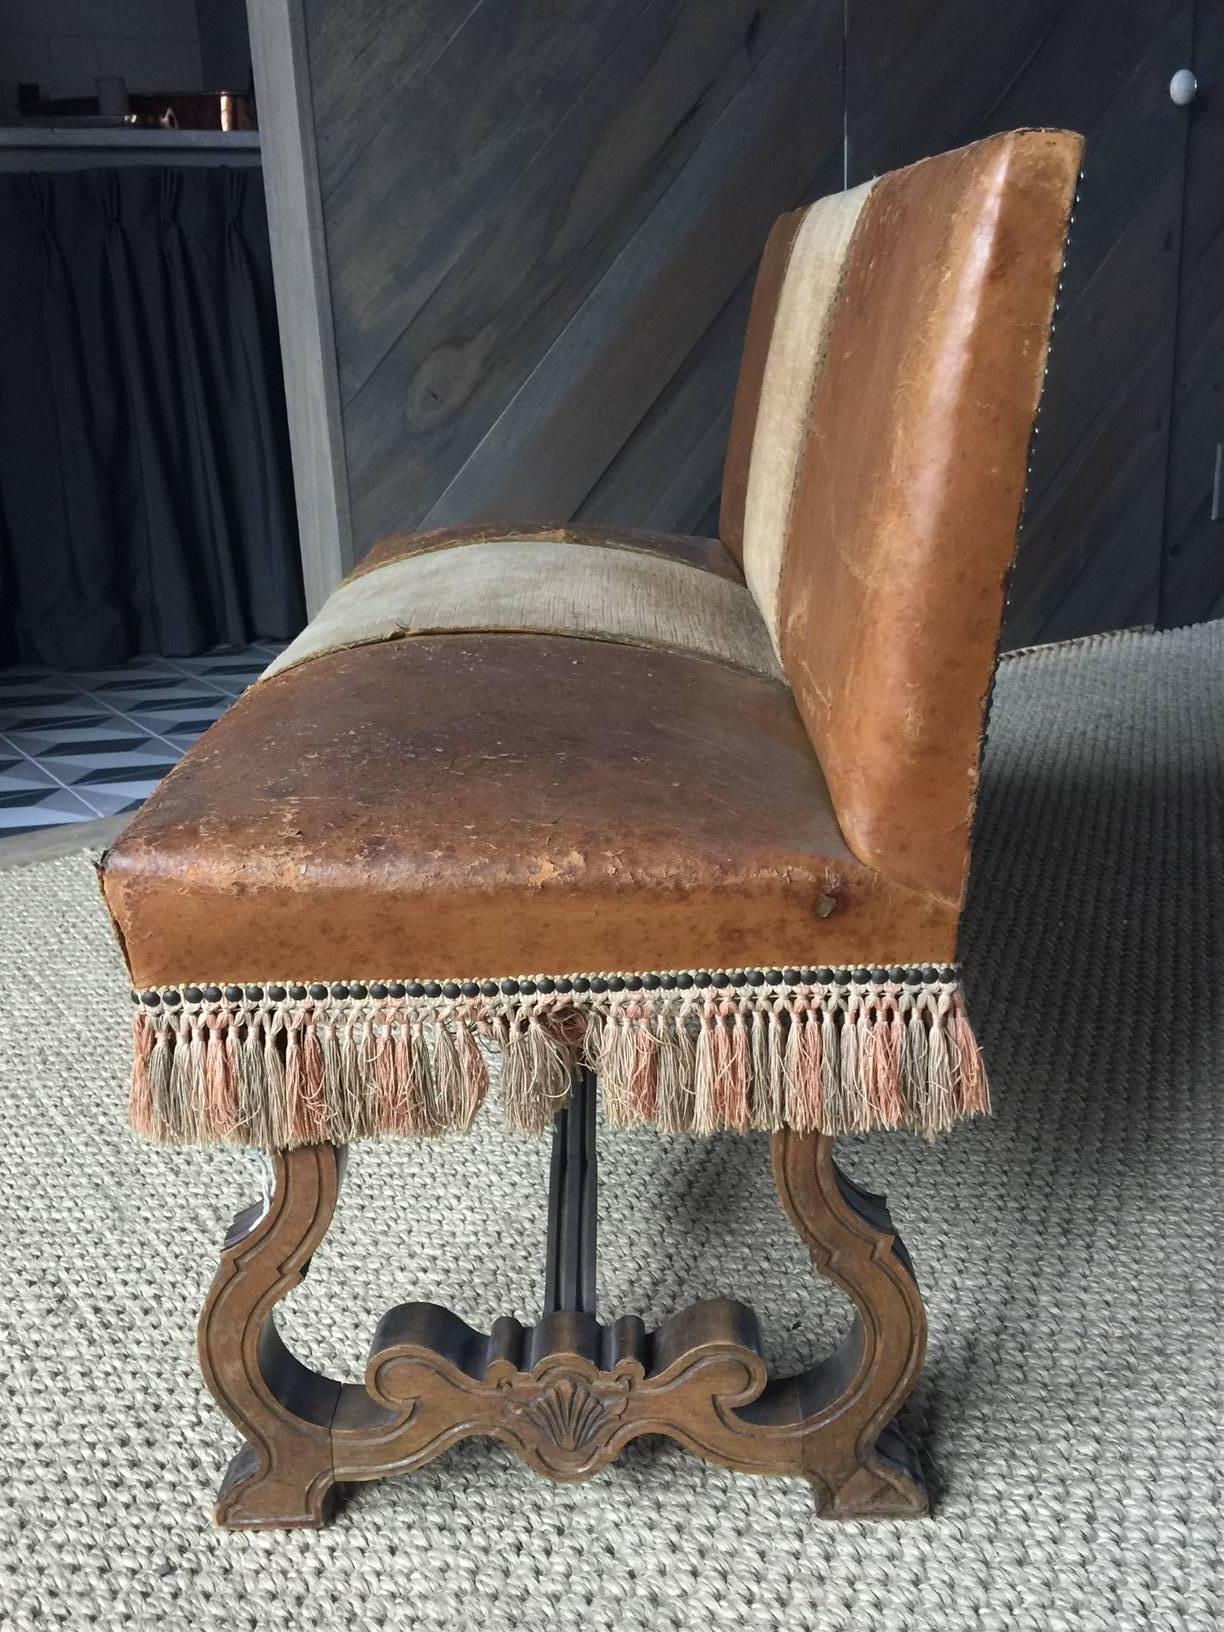 Very stylish Petite Spanish leather bench with fringe and nailheads, late 19th century Baroque style, all original.